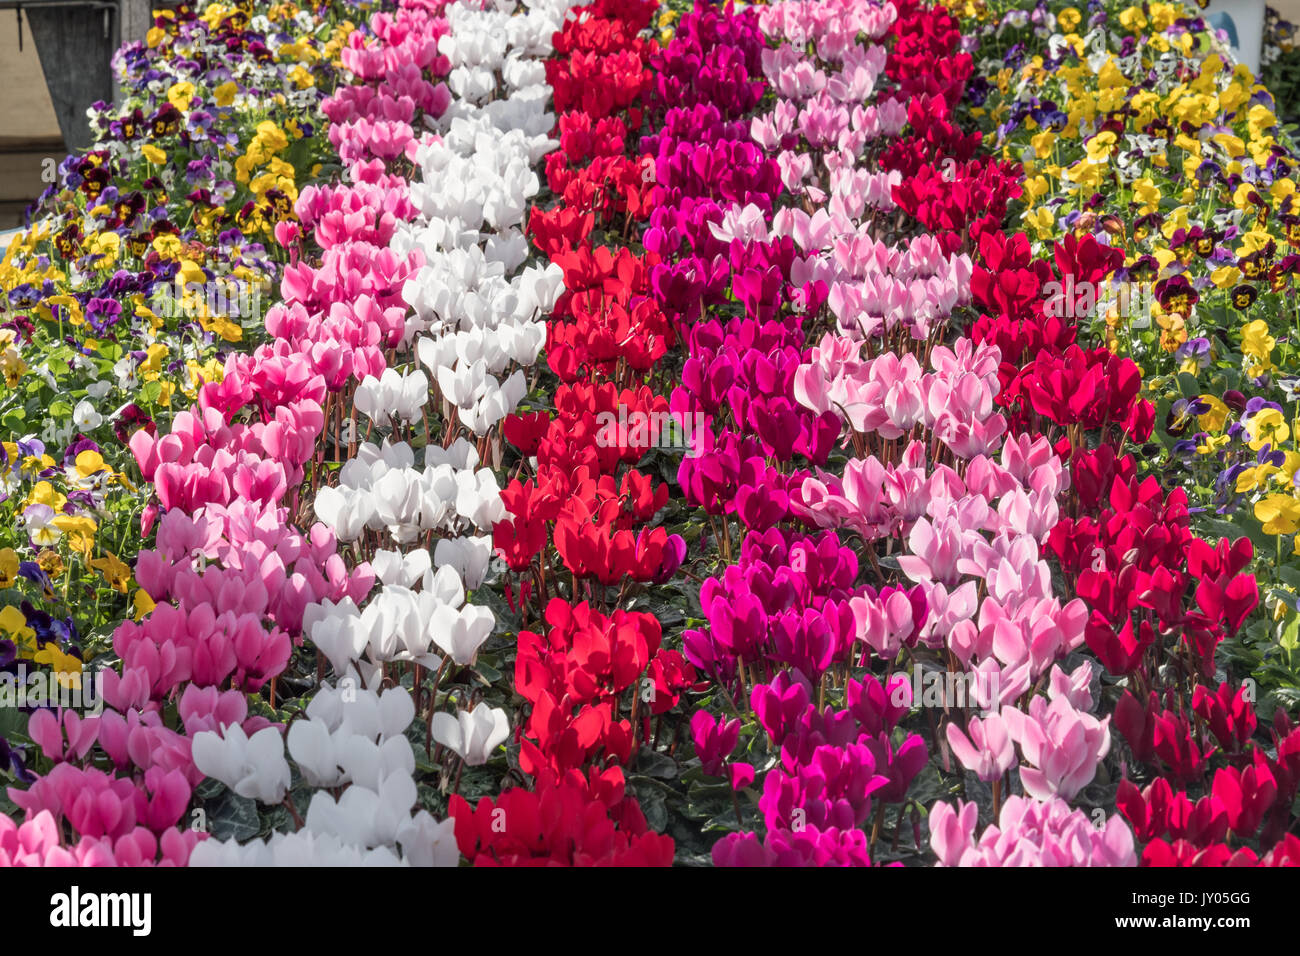 A display of Pansies and Cyclamen in flower. Stock Photo